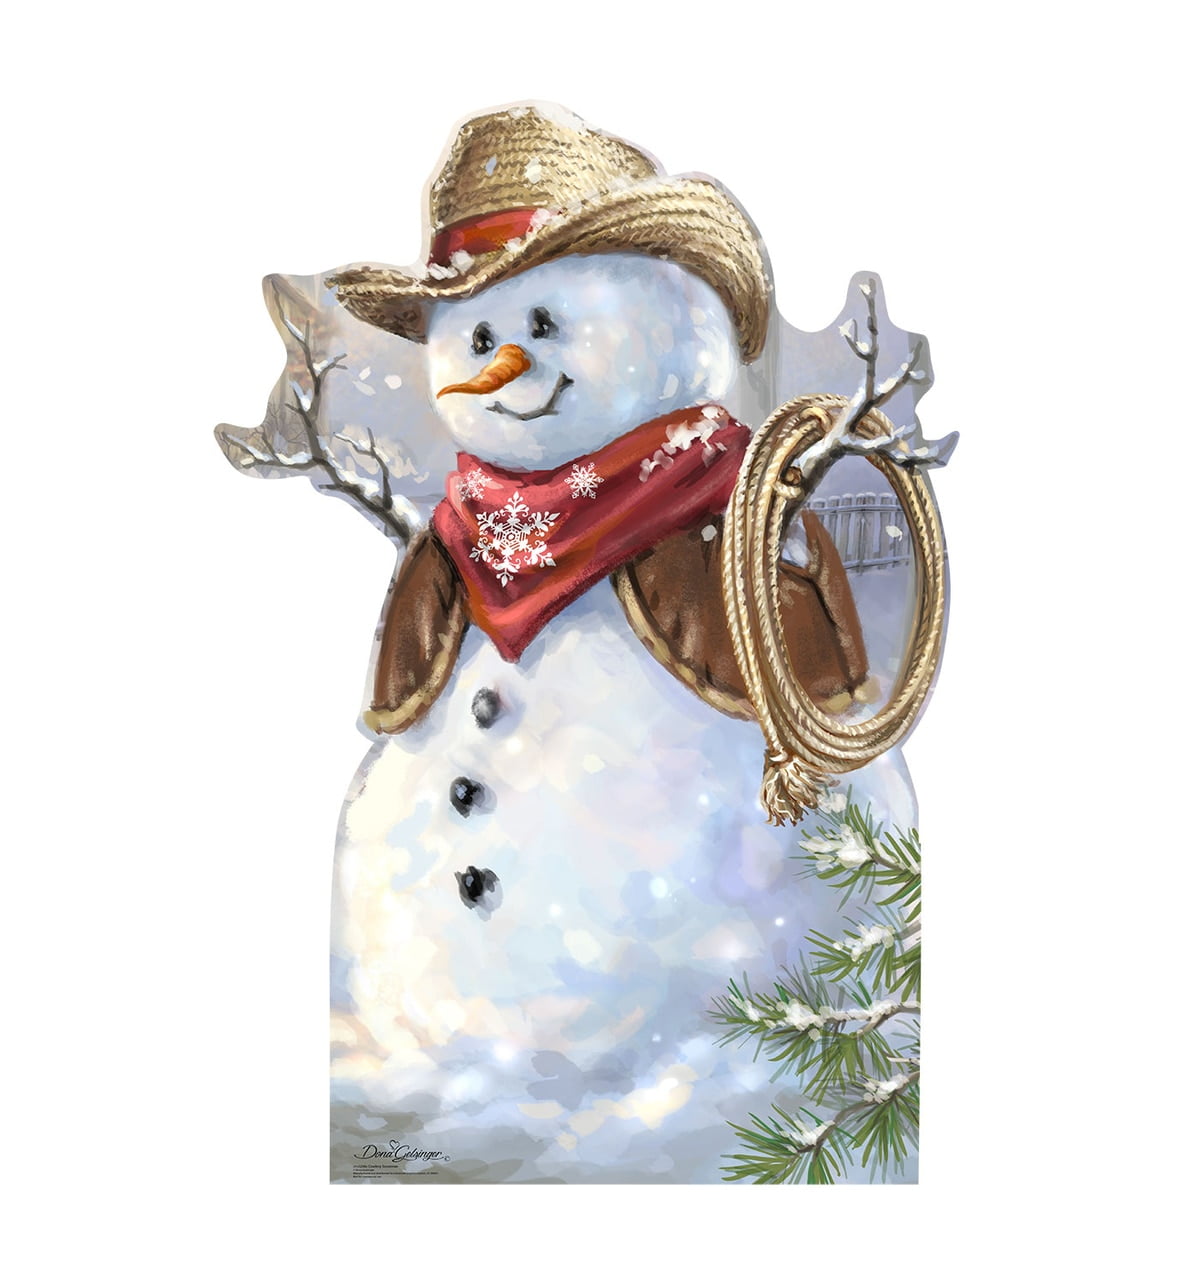 Picture of Advanced Graphics 2112 65 x 44 in. Cowboy Snowman - Dona Gelsinger Art Cardboard Standup